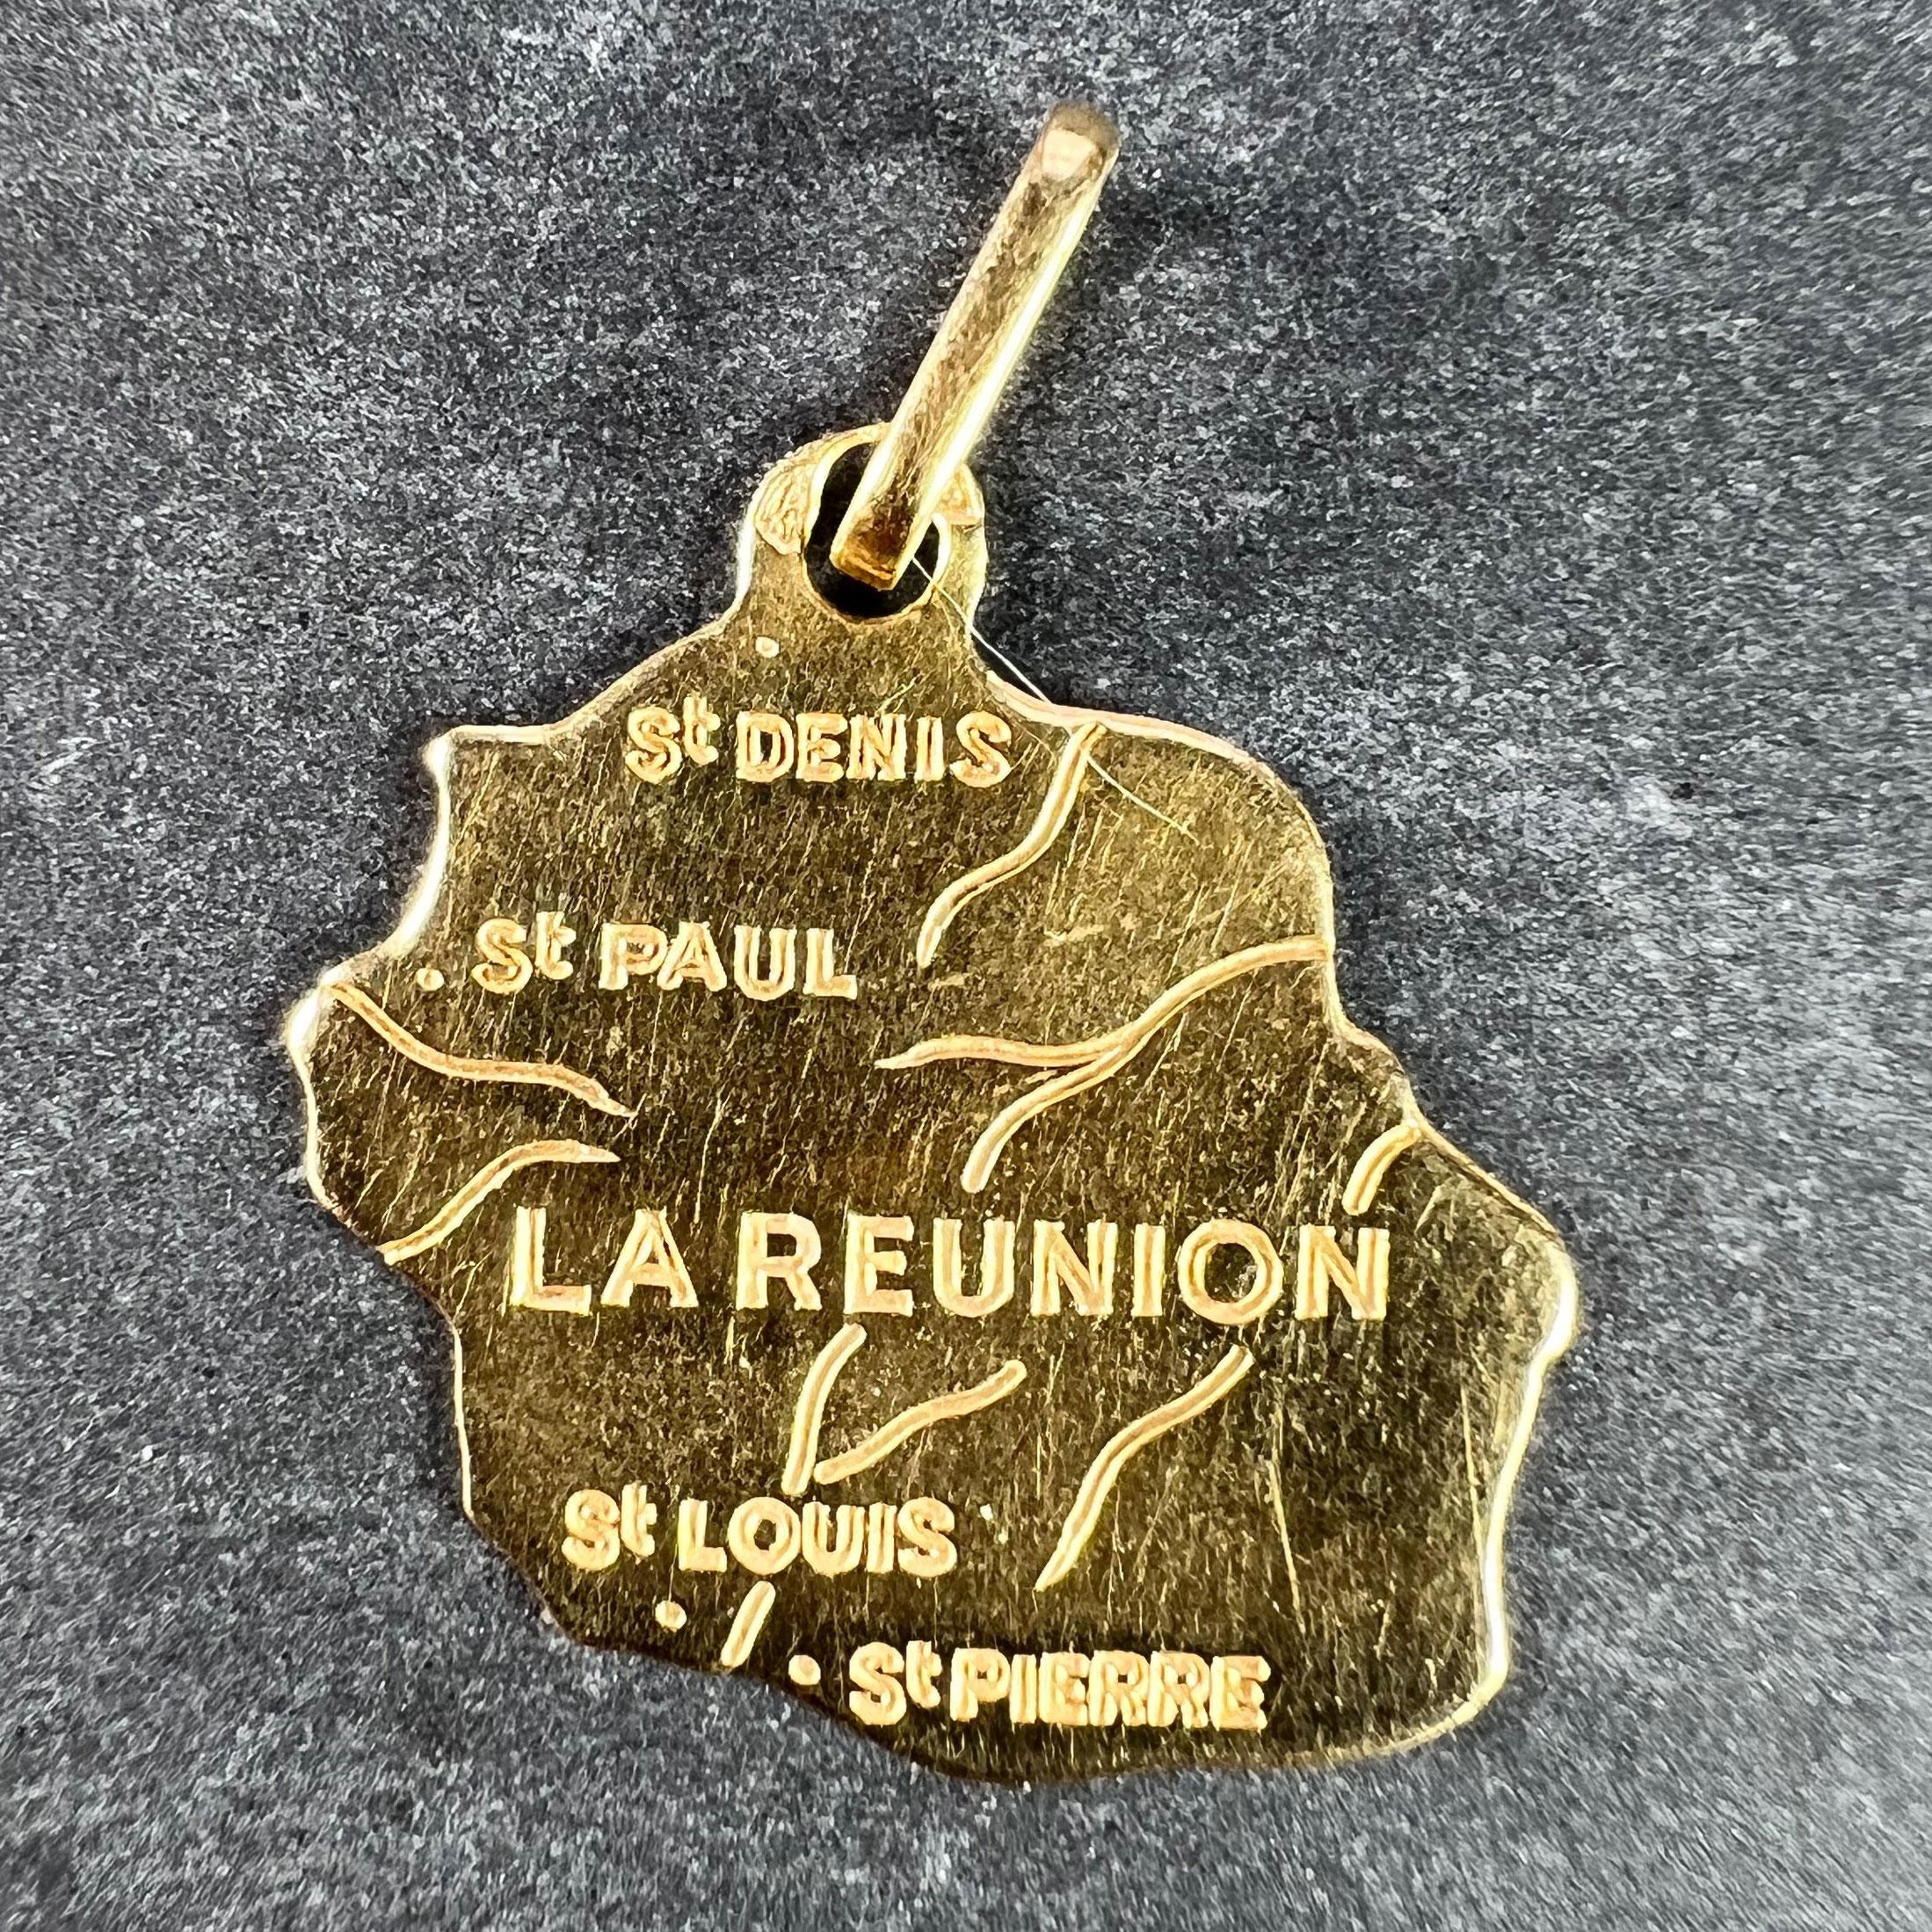 A French 18 karat (18K) yellow gold charm pendant designed as a map of the island of Reunion with the towns of St. Denis, St. Paul, St. Louis and St. Pierre marked on it. Stamped to the bail with the eagle's head mark for French manufacture and 18